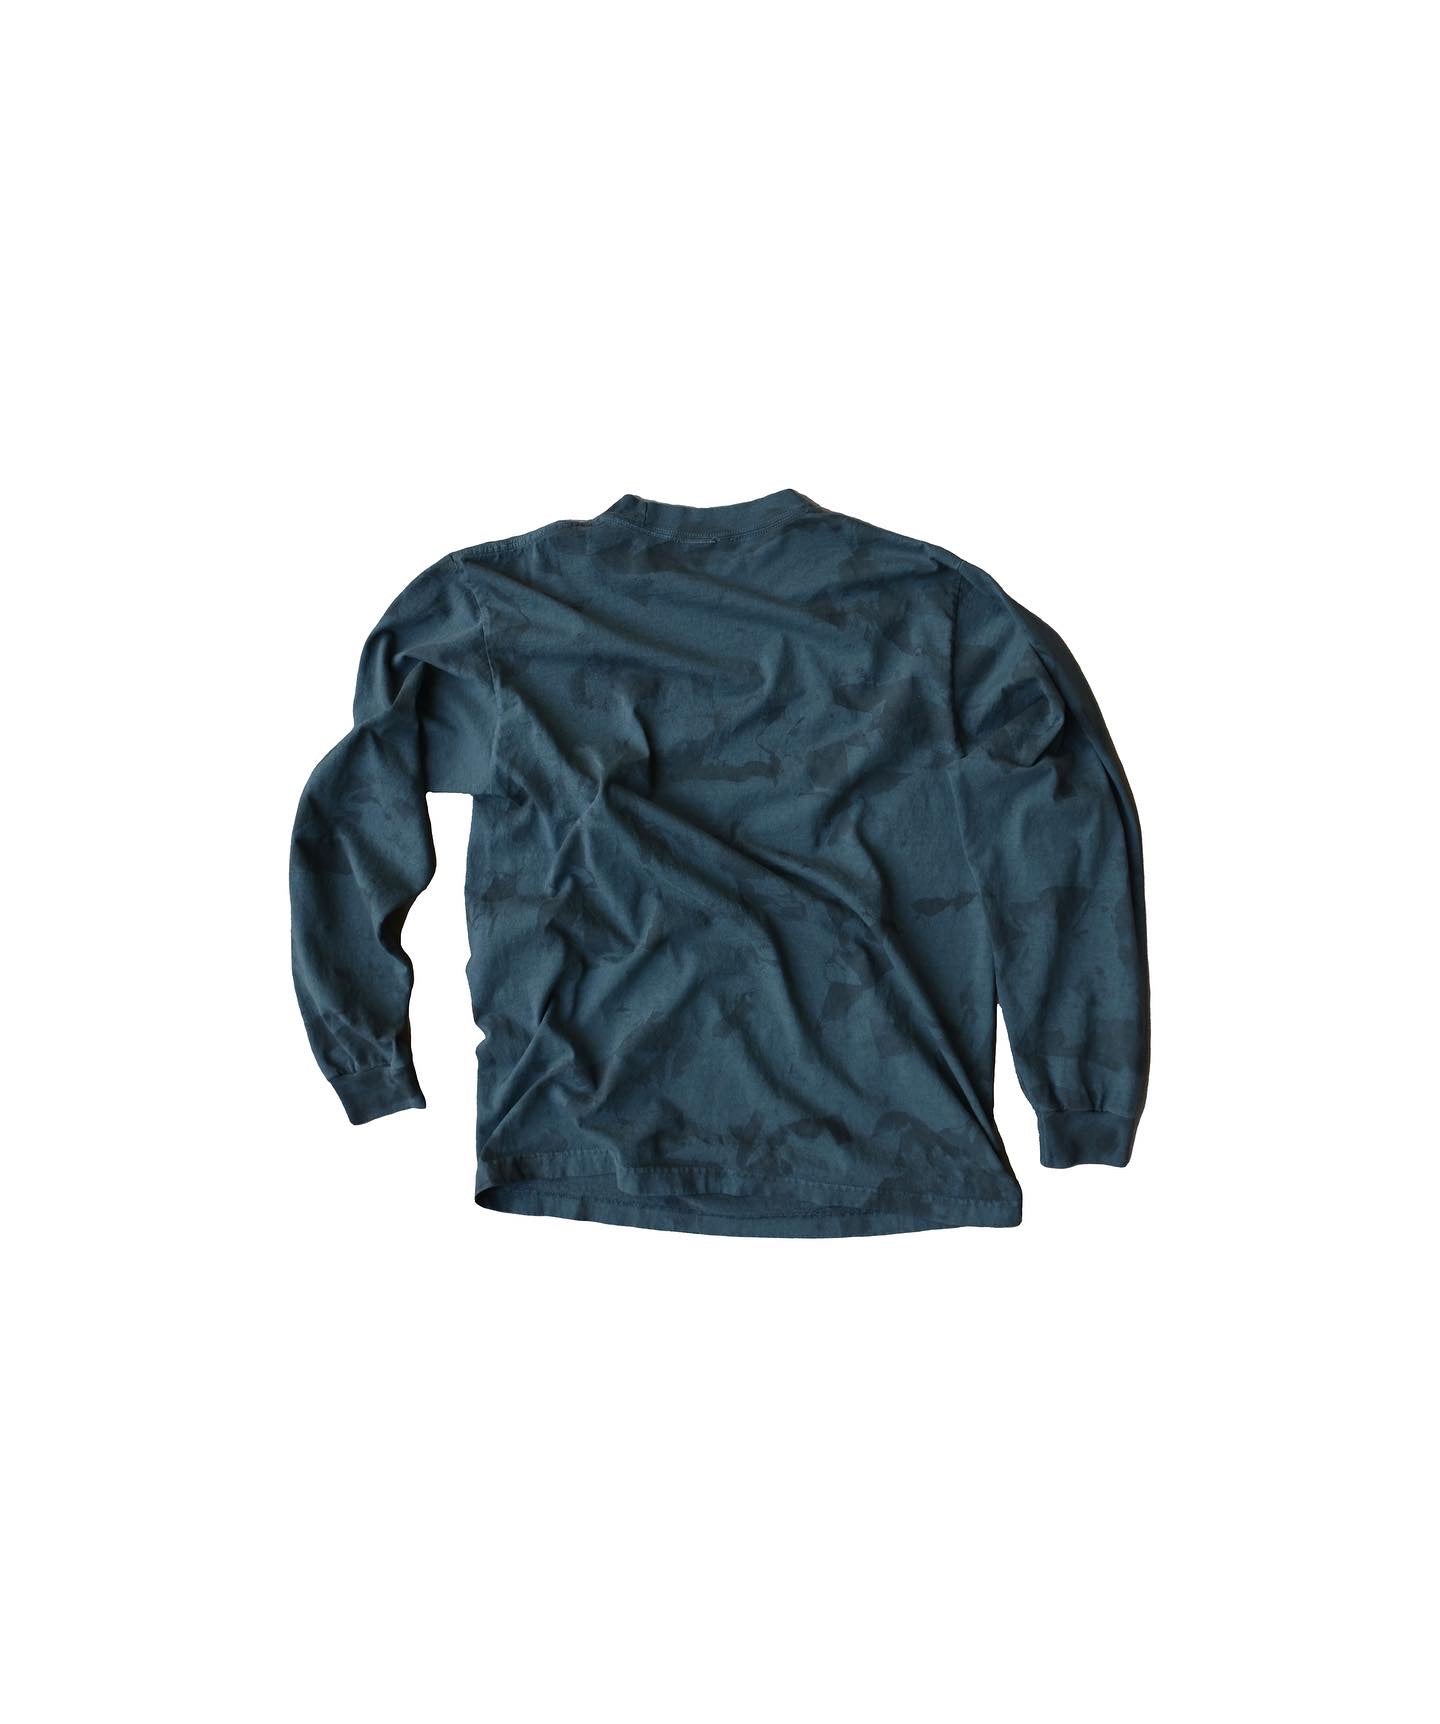 CHAMBRAY BLUE STAINED LONG-SLEEVE TEE